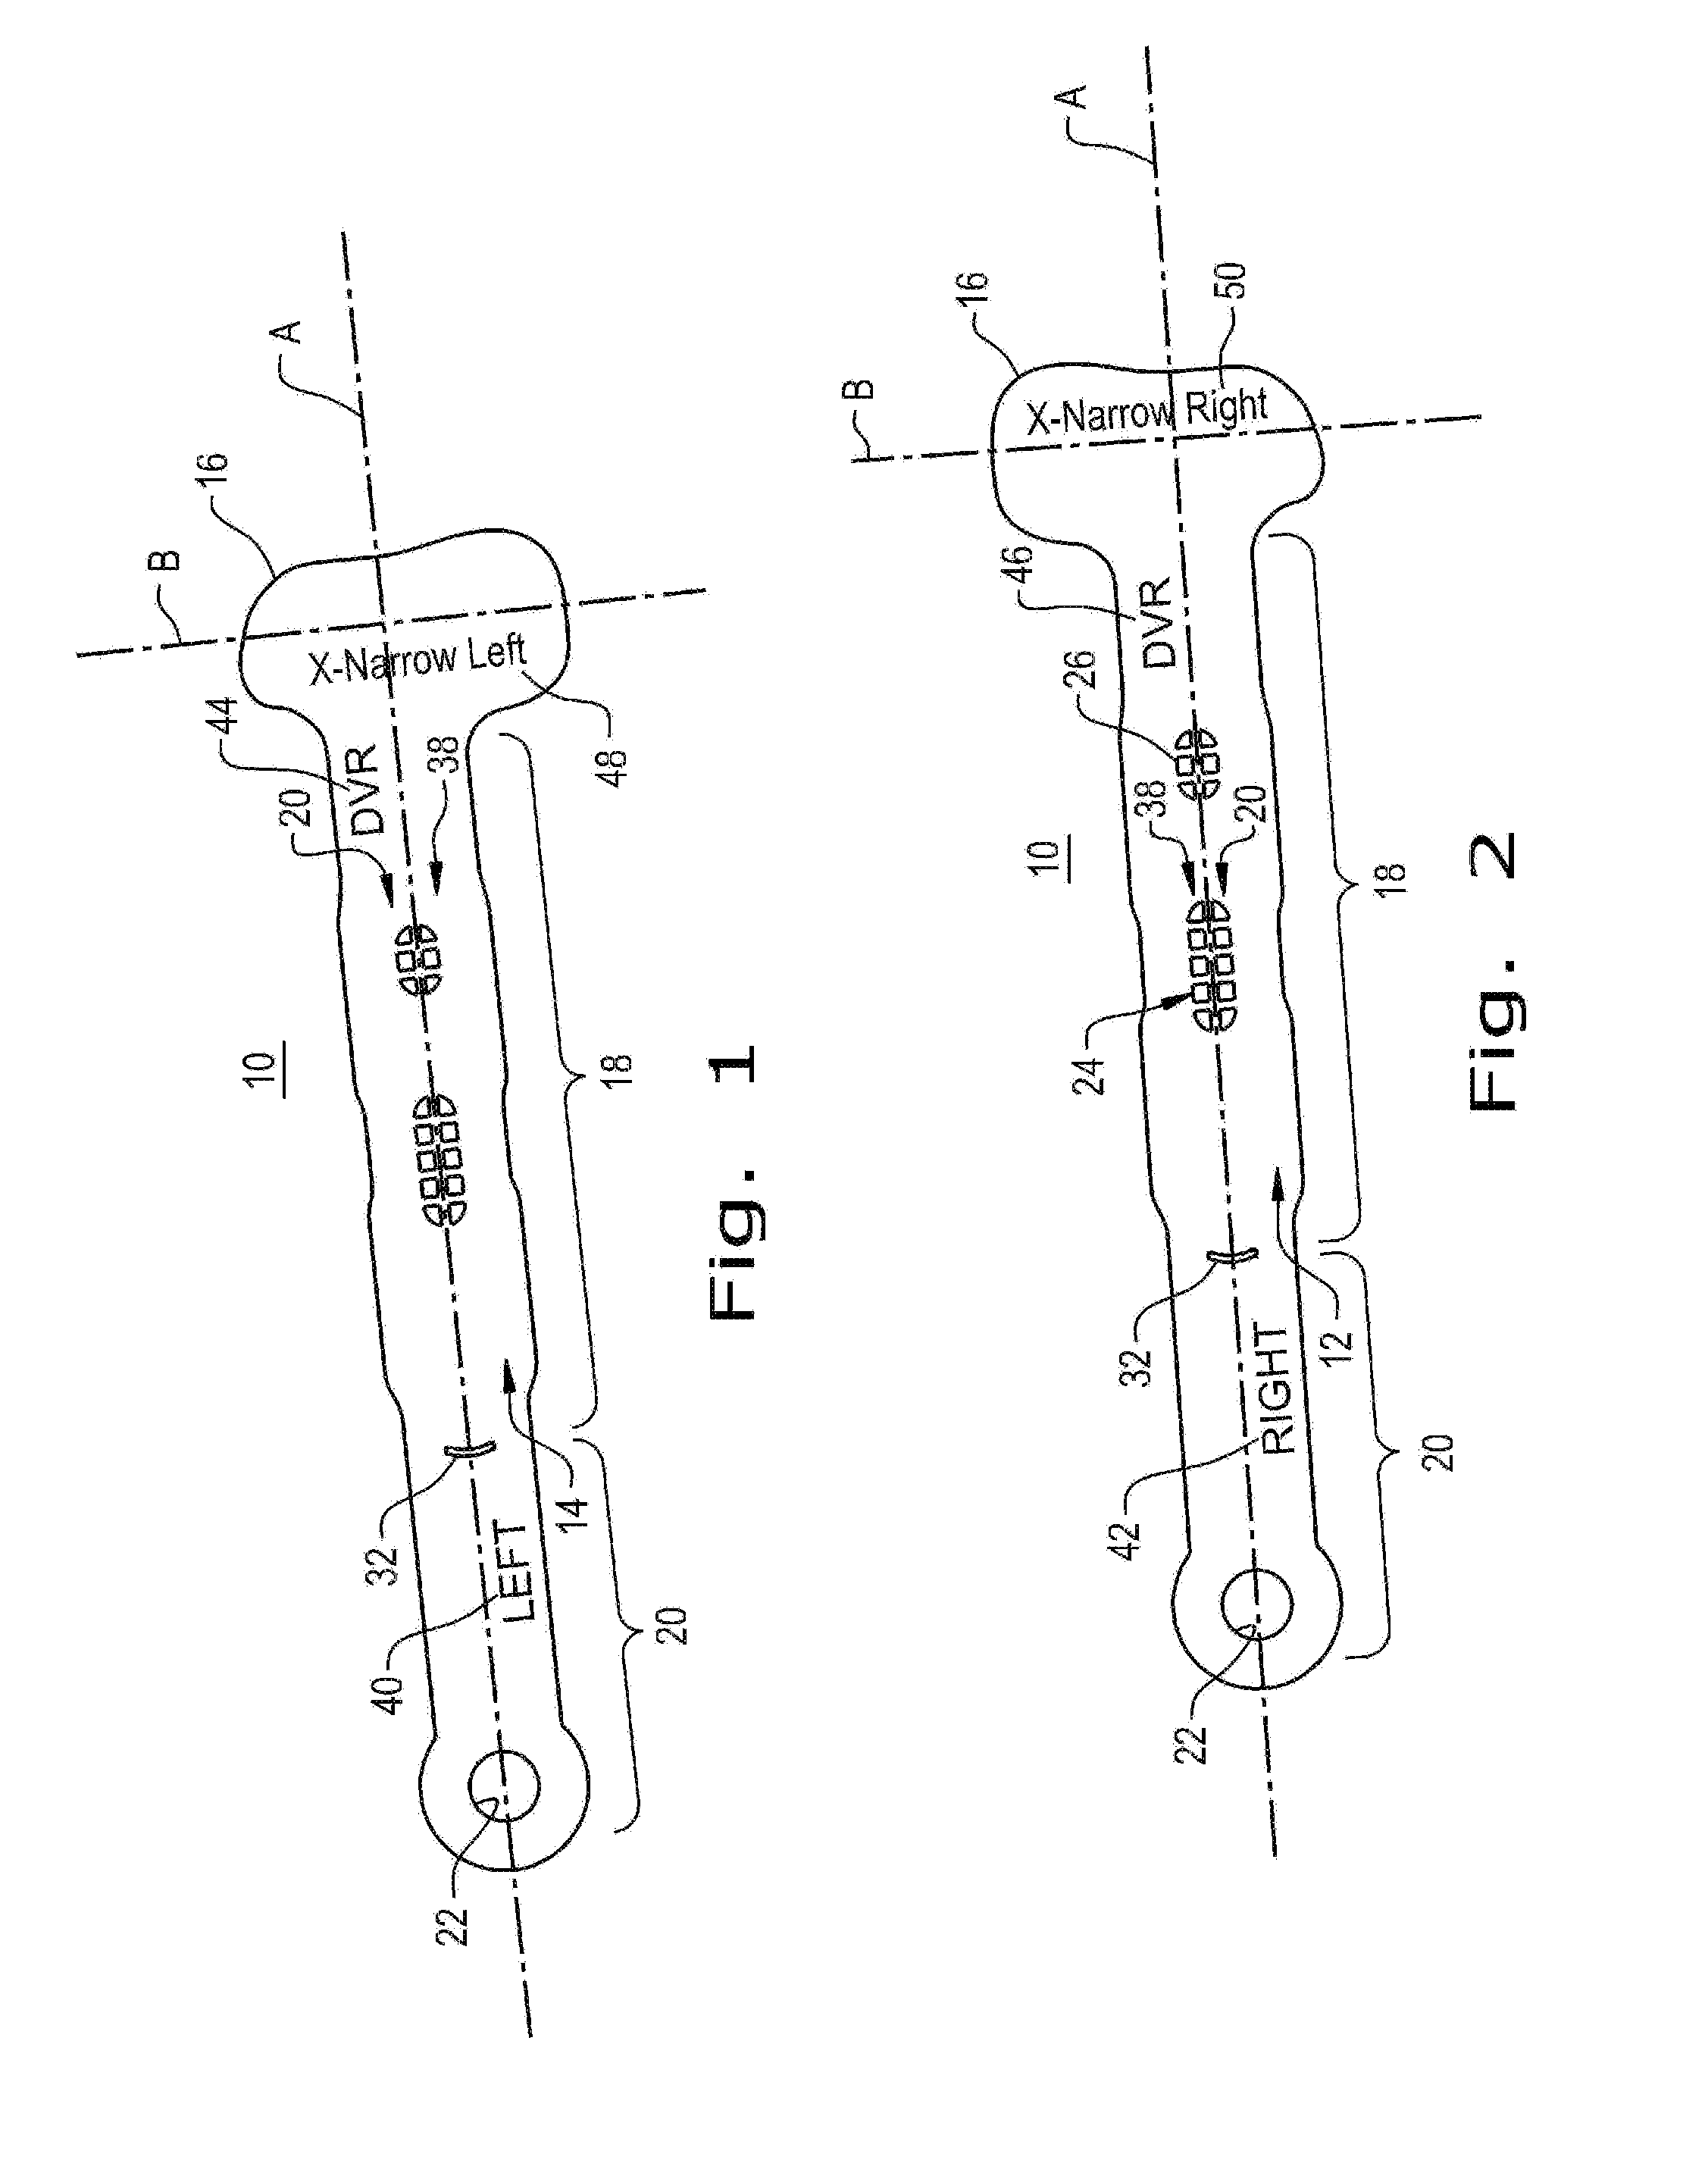 Orthopaedic implant template and method of making